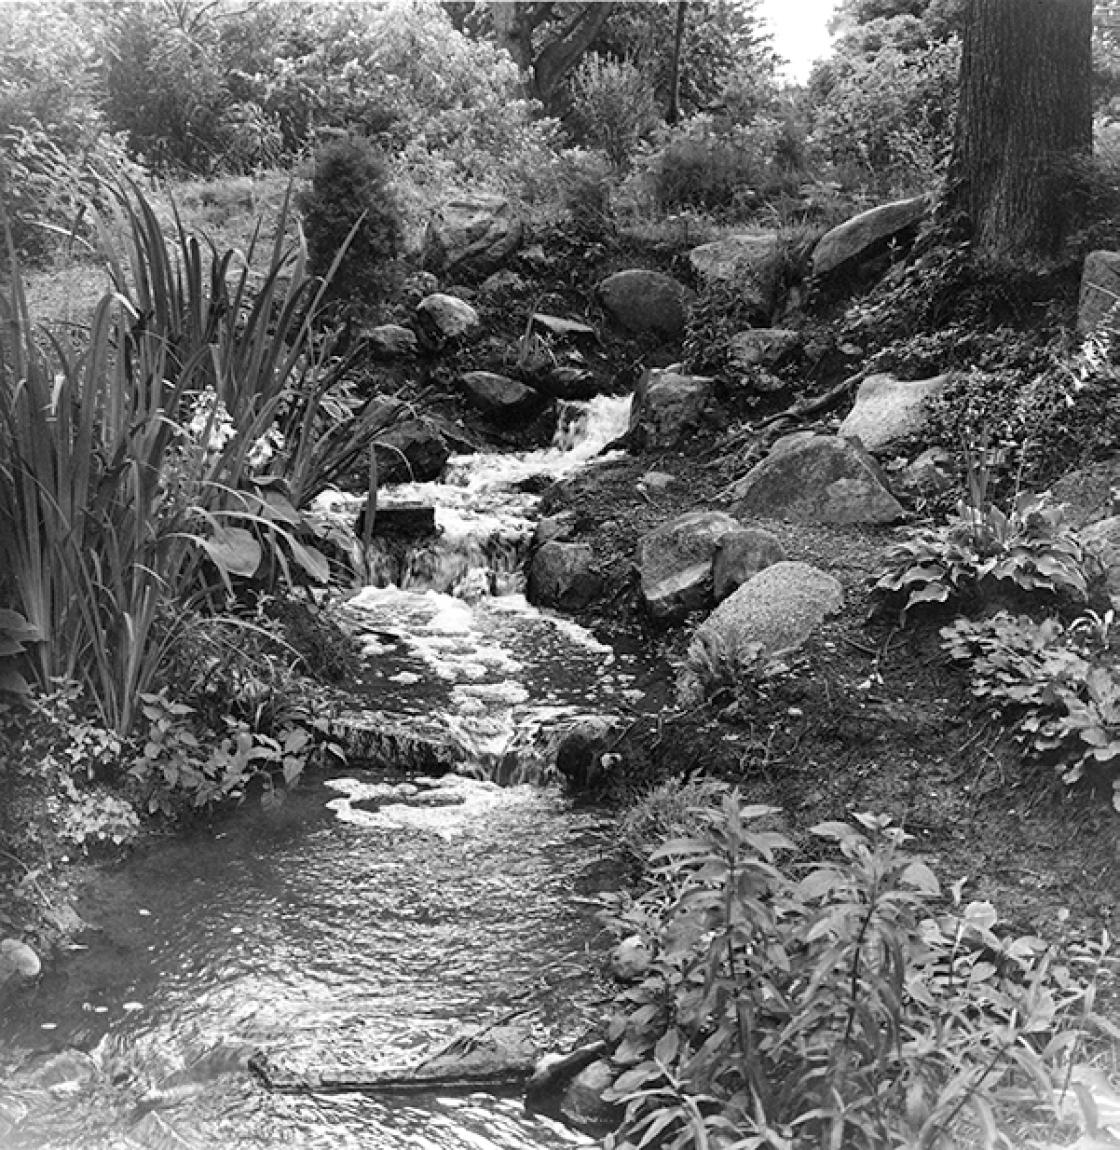 Photograph of the rebuilt Lily Pond Cascade with Hosta Collection, 1976.